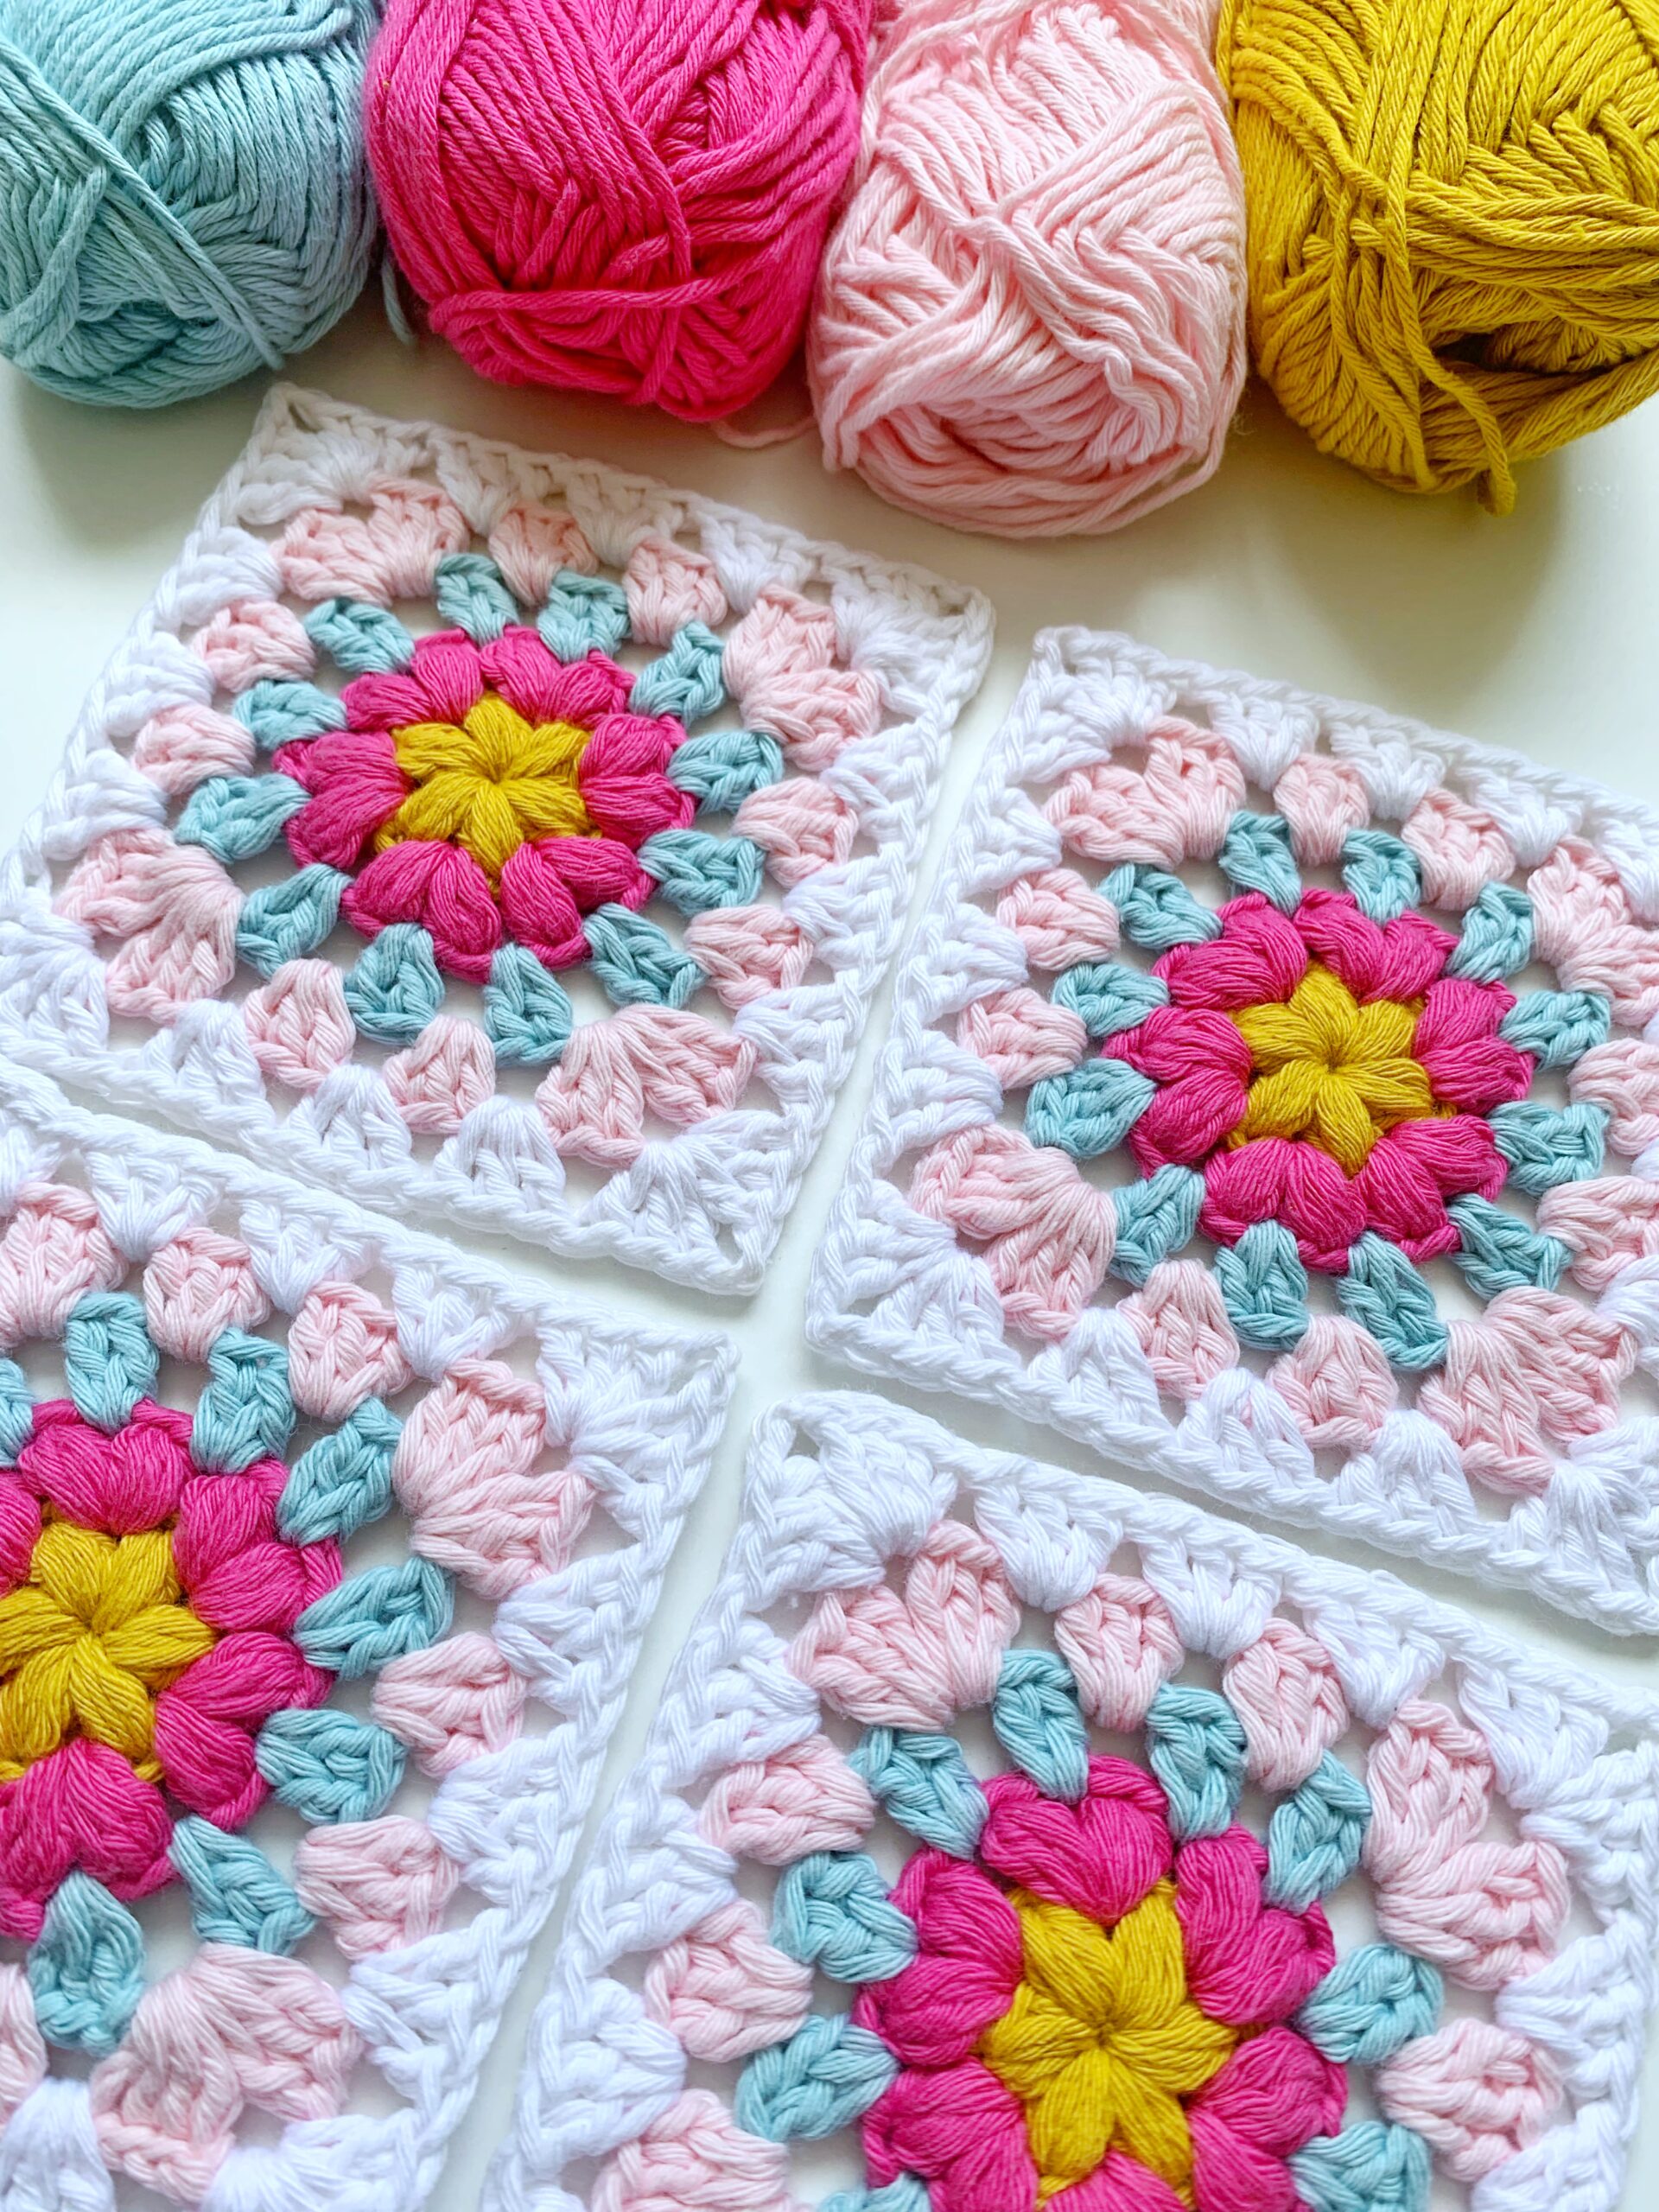 How to Crochet a Star Granny Square - Free Easy Step by Step